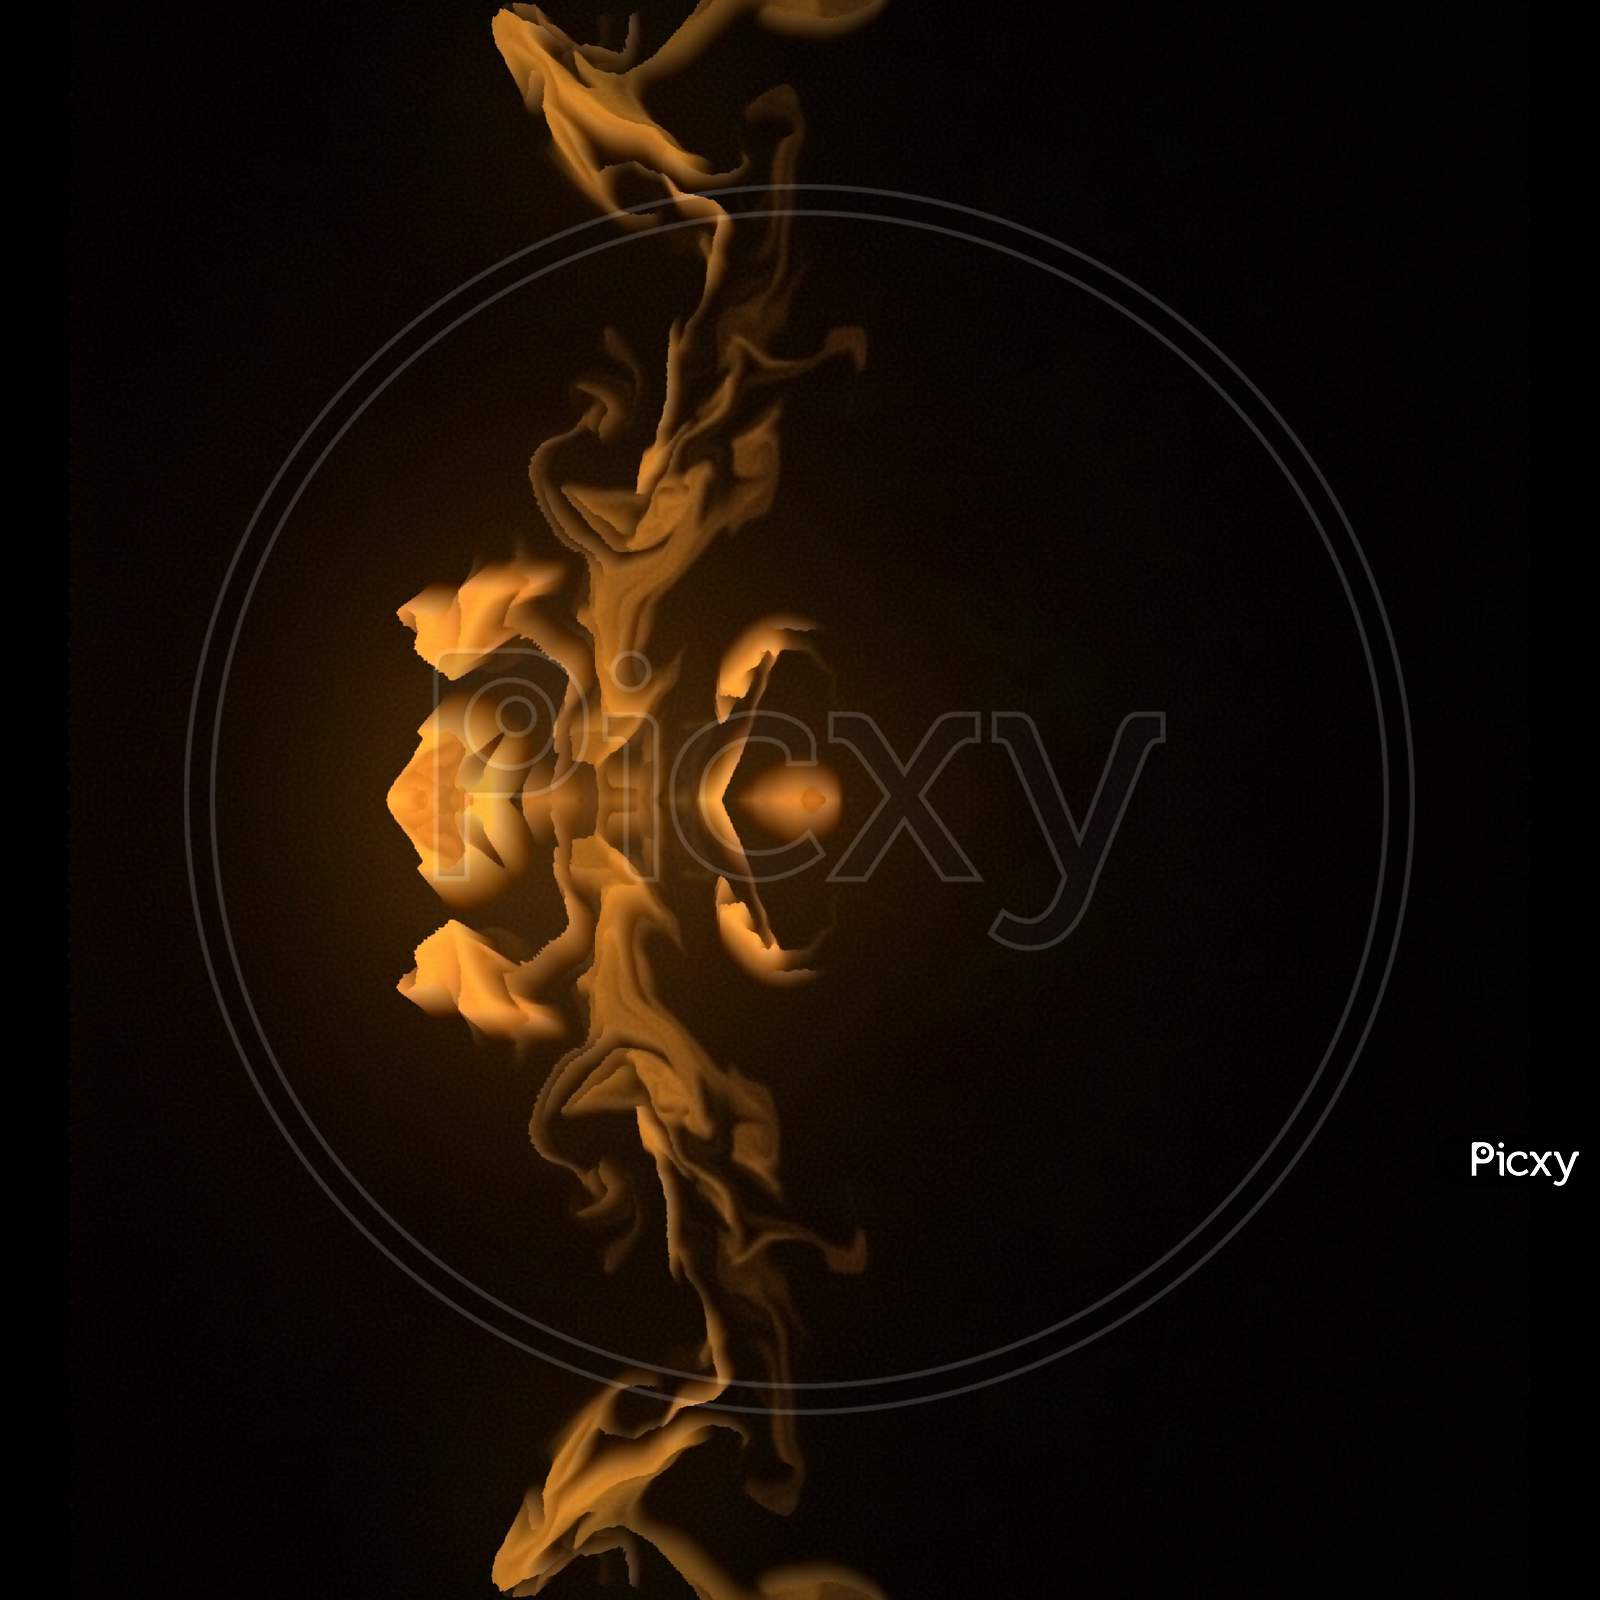 Fire with black background.